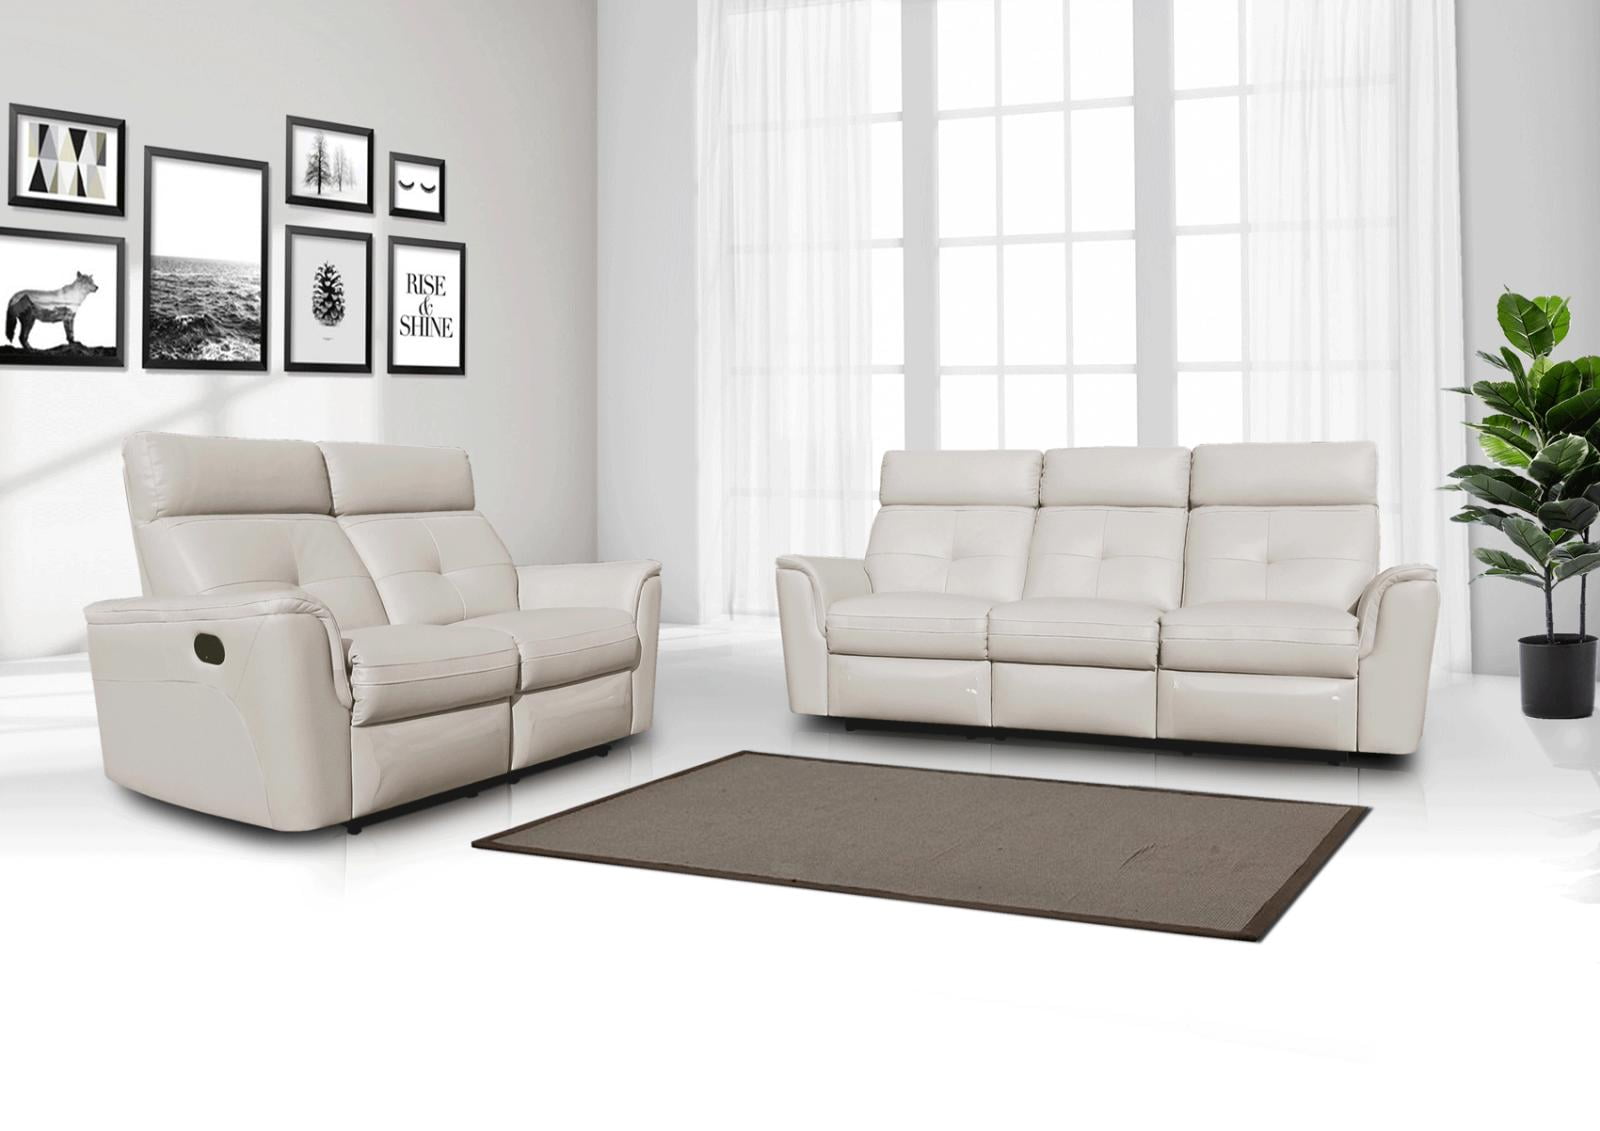 White Italian Leather Recliner Sofa Set, Contemporary Leather Recliner Sofa